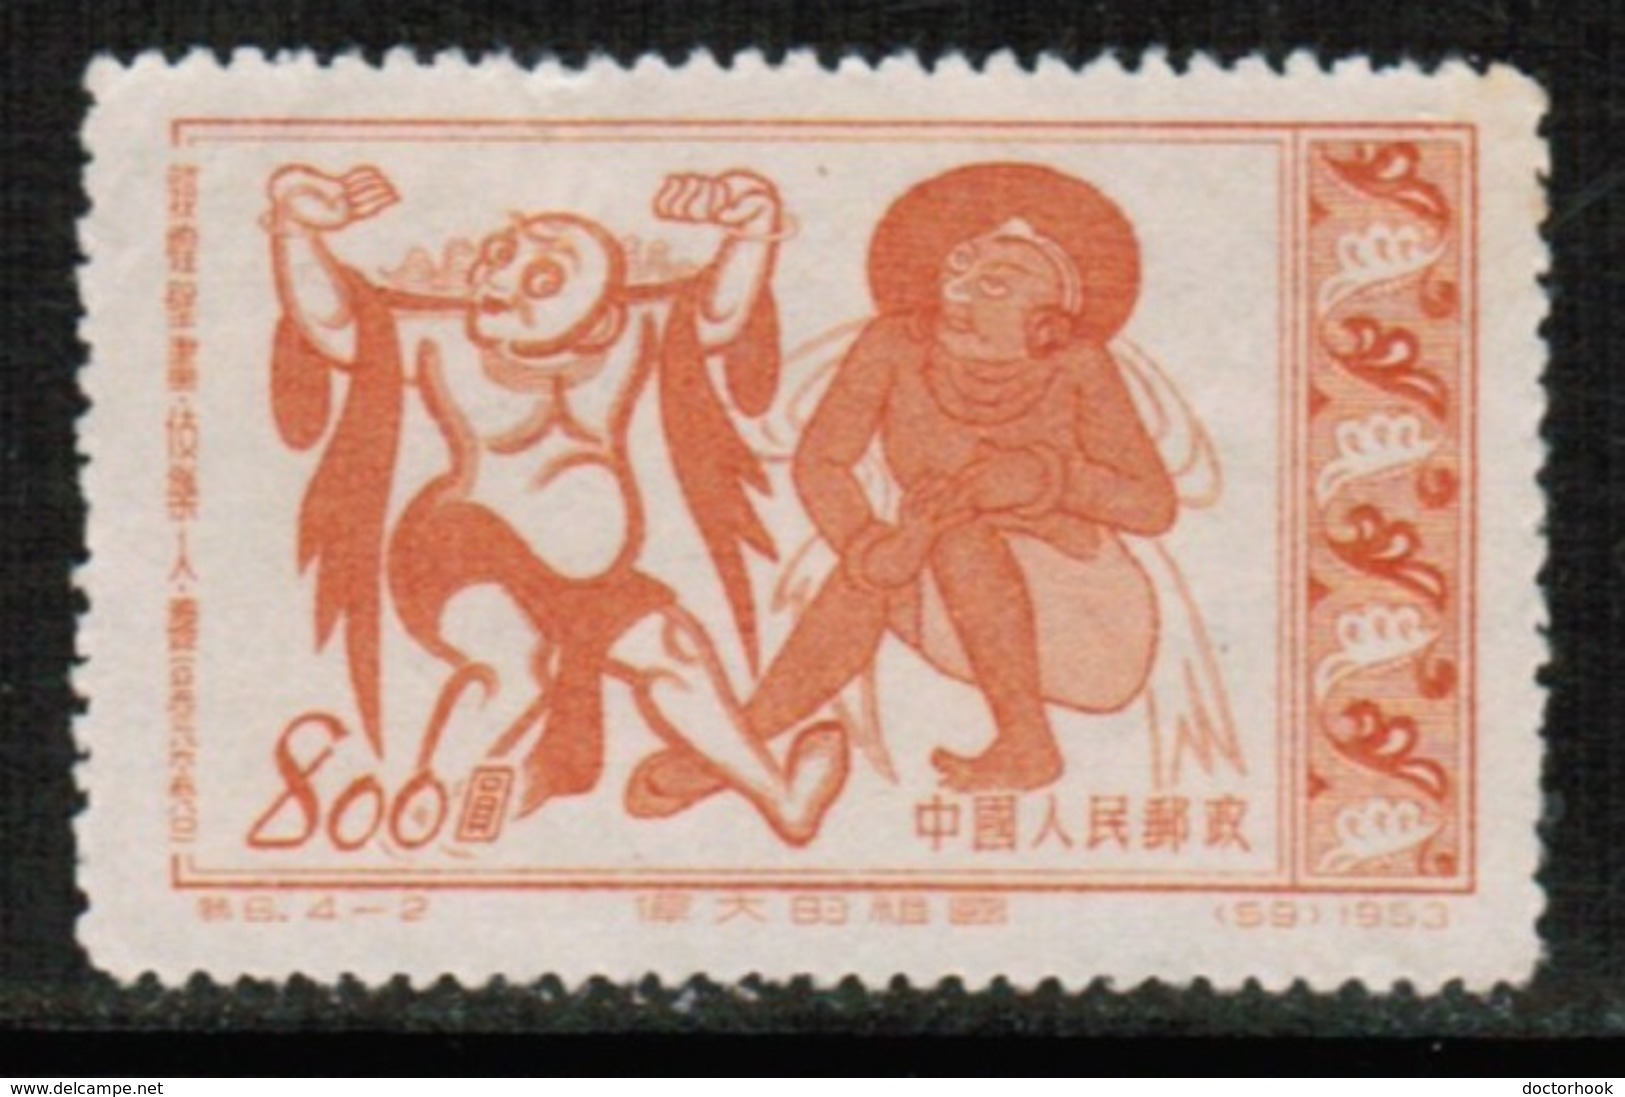 PEOPLES REPUBLIC Of CHINA  Scott # 190* VF UNUSED No Gum As Issued (Stamp Scan # 511) - Unused Stamps